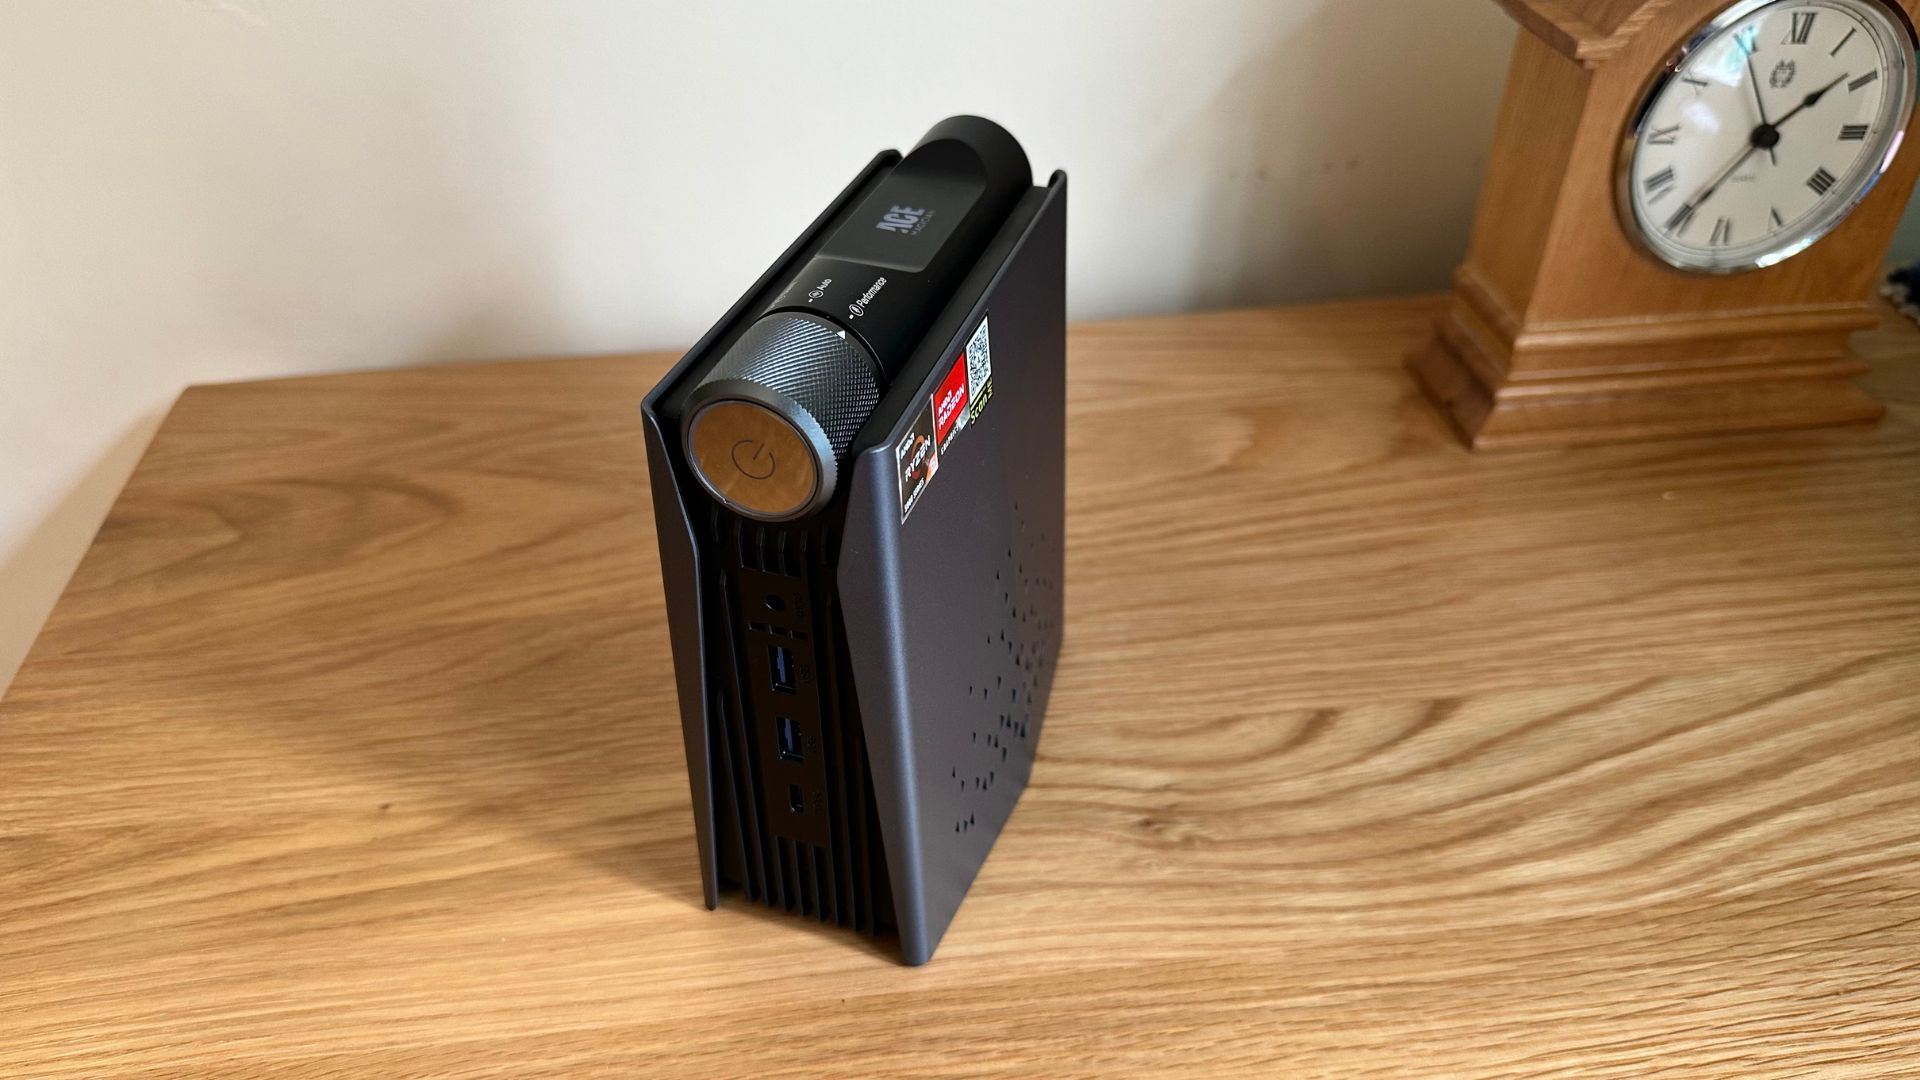 AceMagician AMR5 mini PC on a wooden sideboard